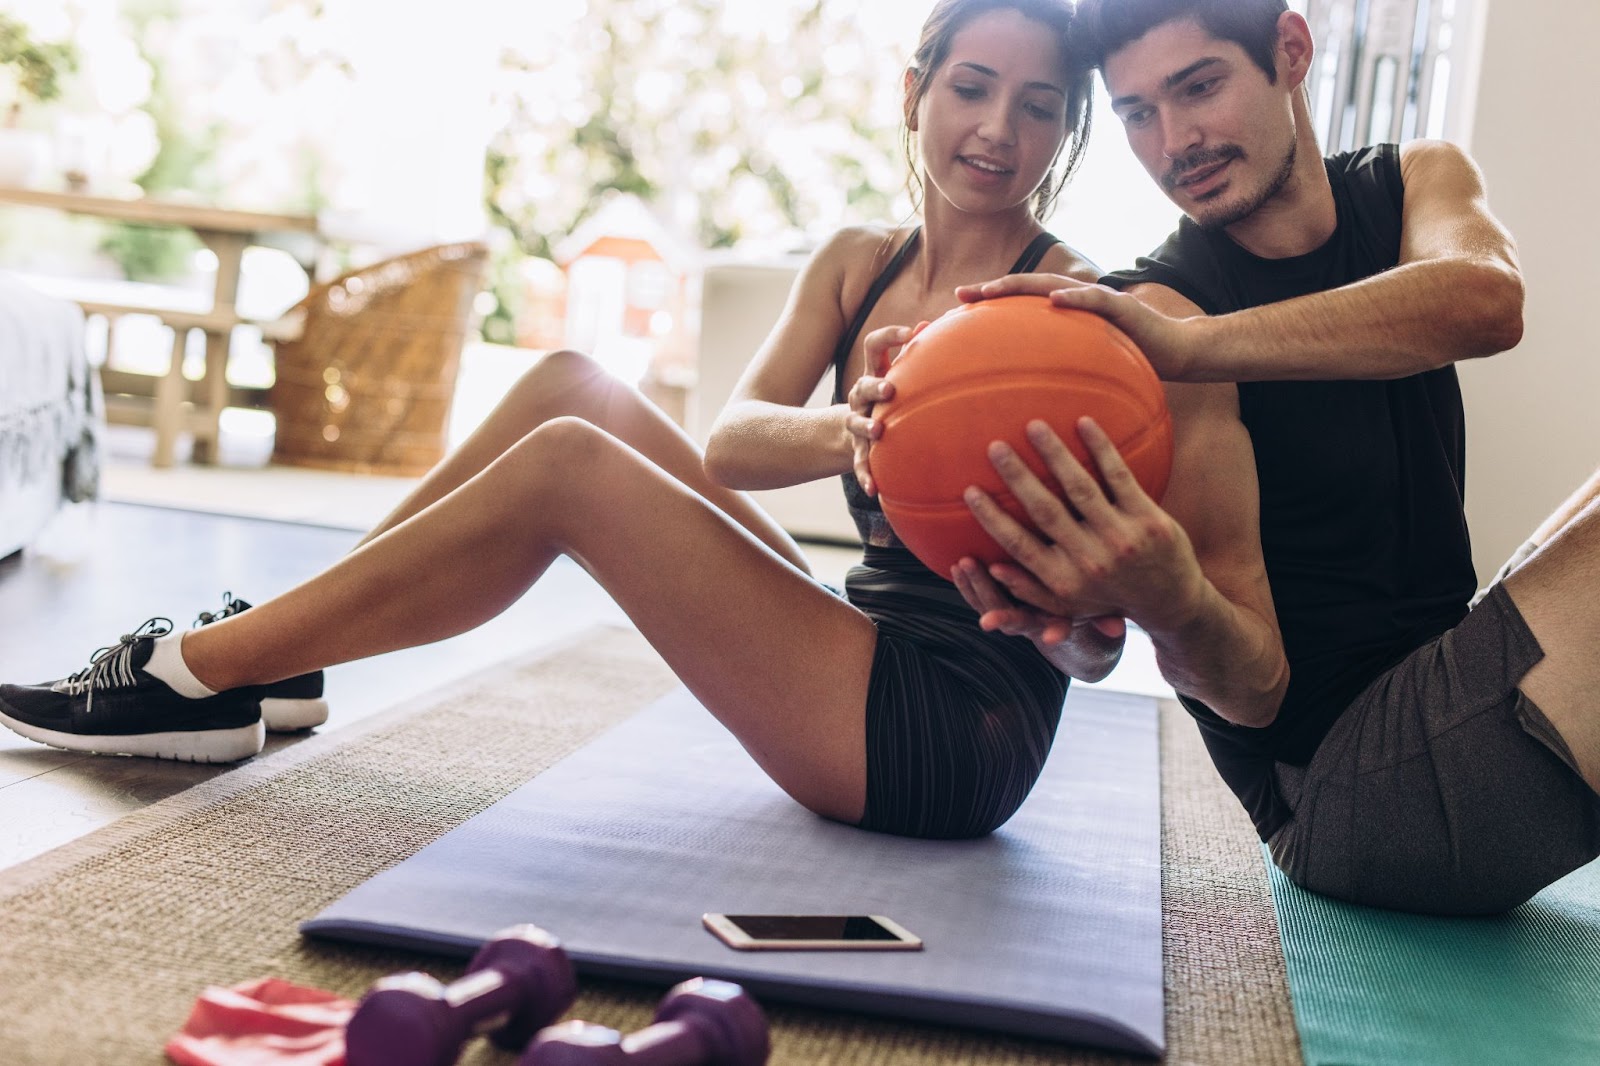 Attractive young couple passing a medicine ball while leaning on each other’s backs